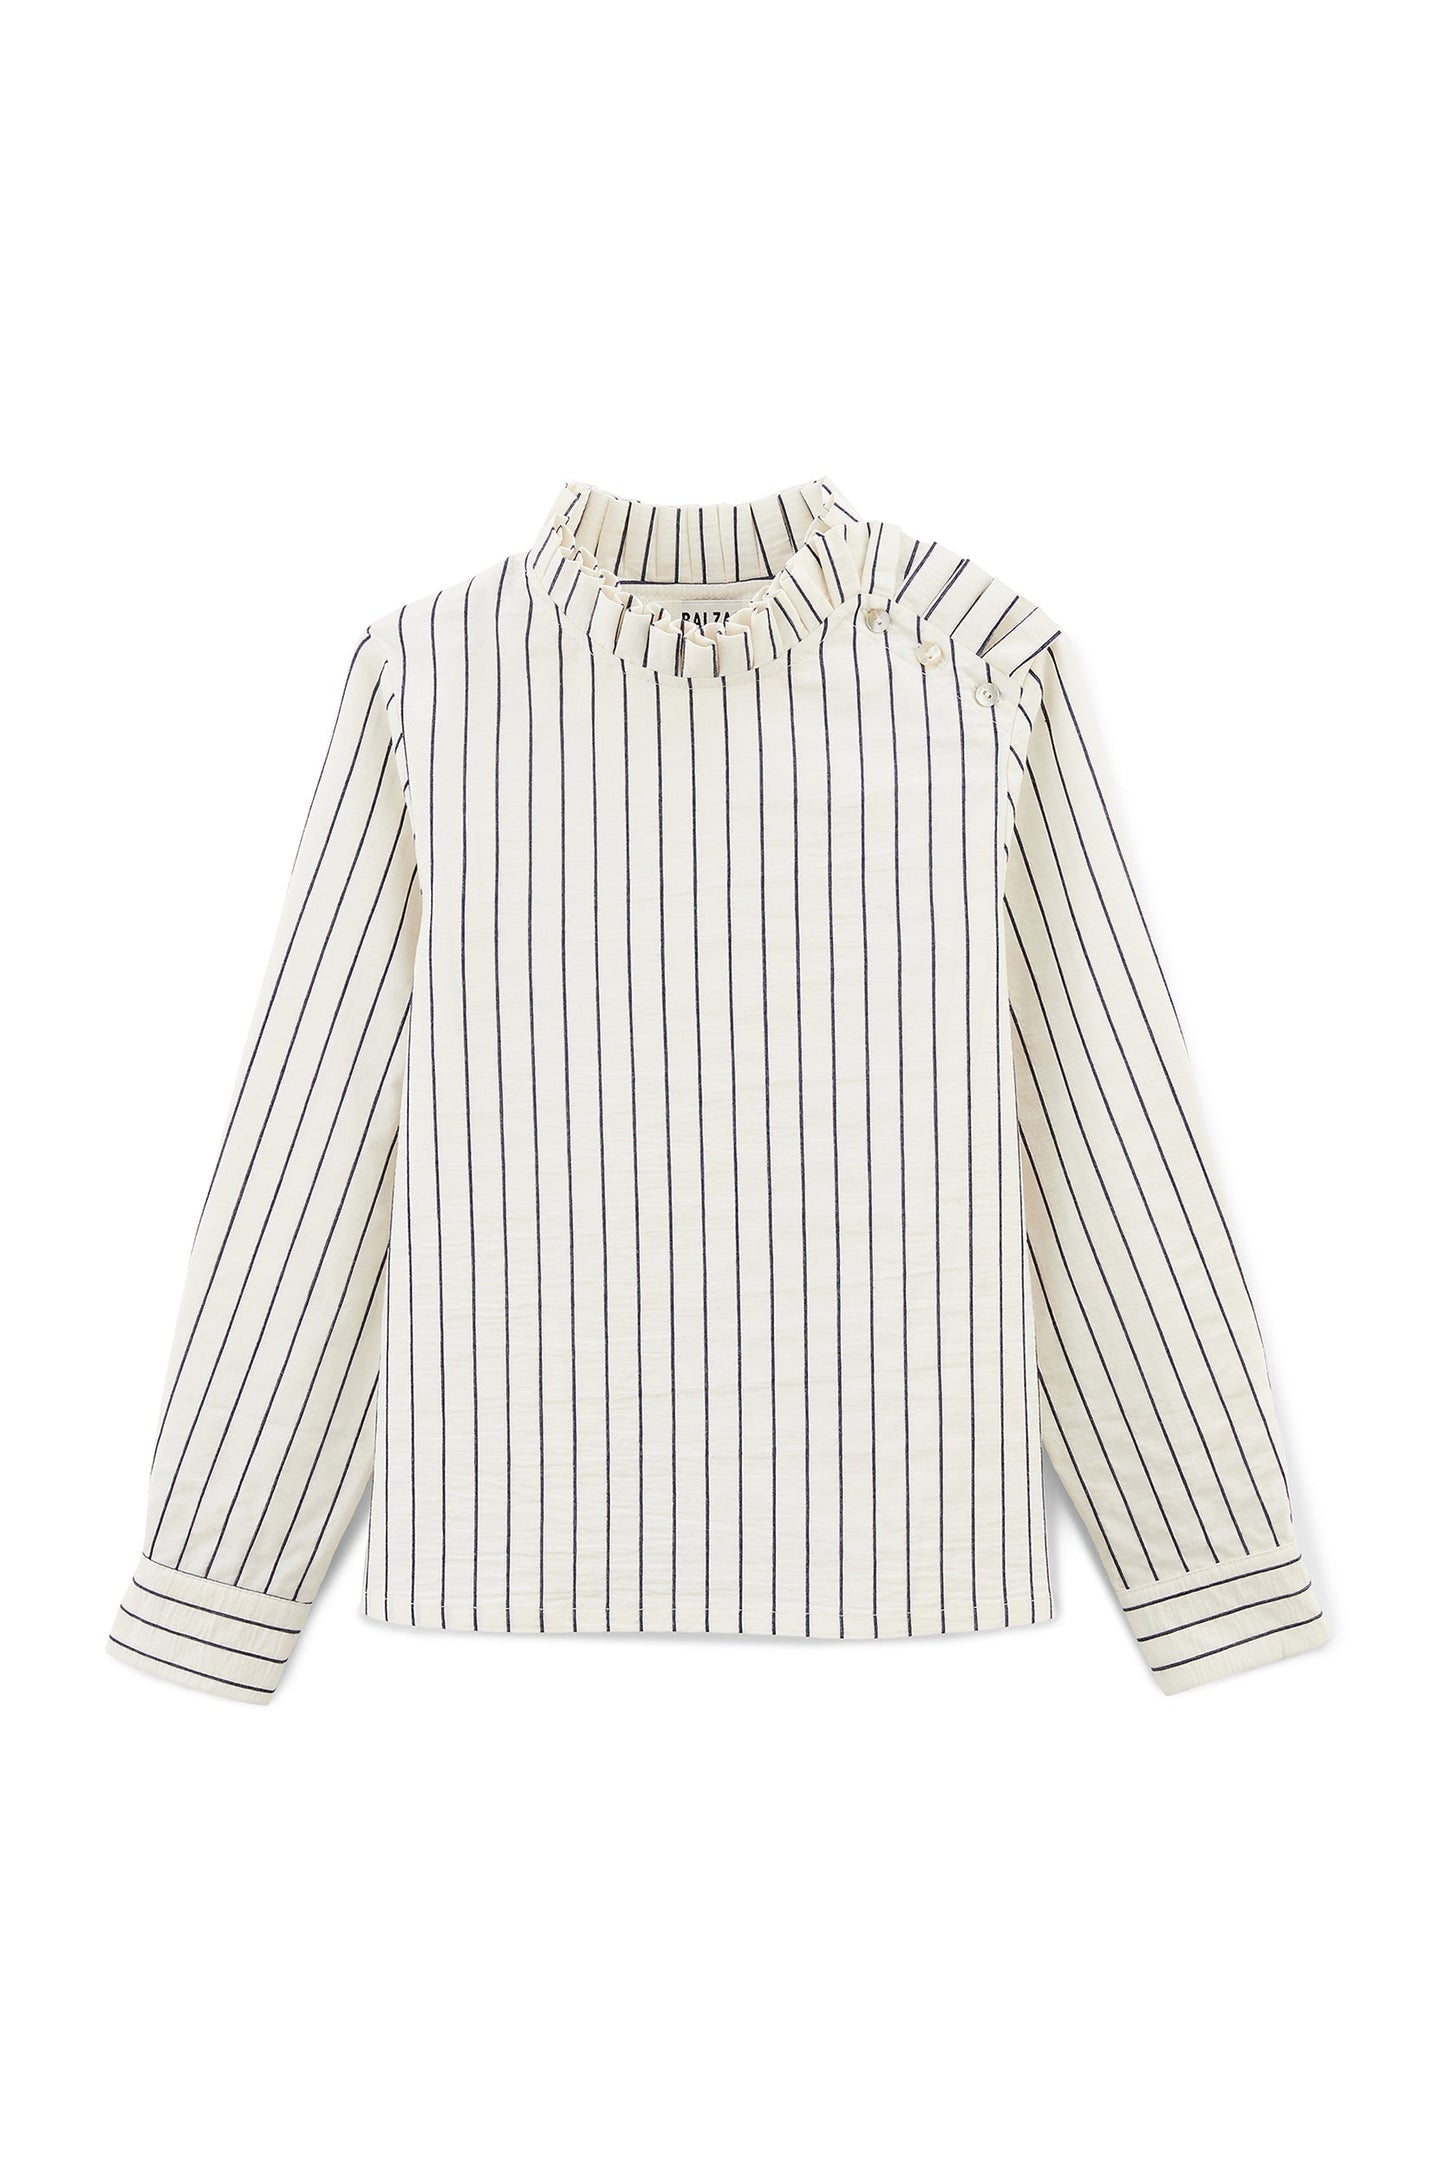 Brussels black and white striped shirt